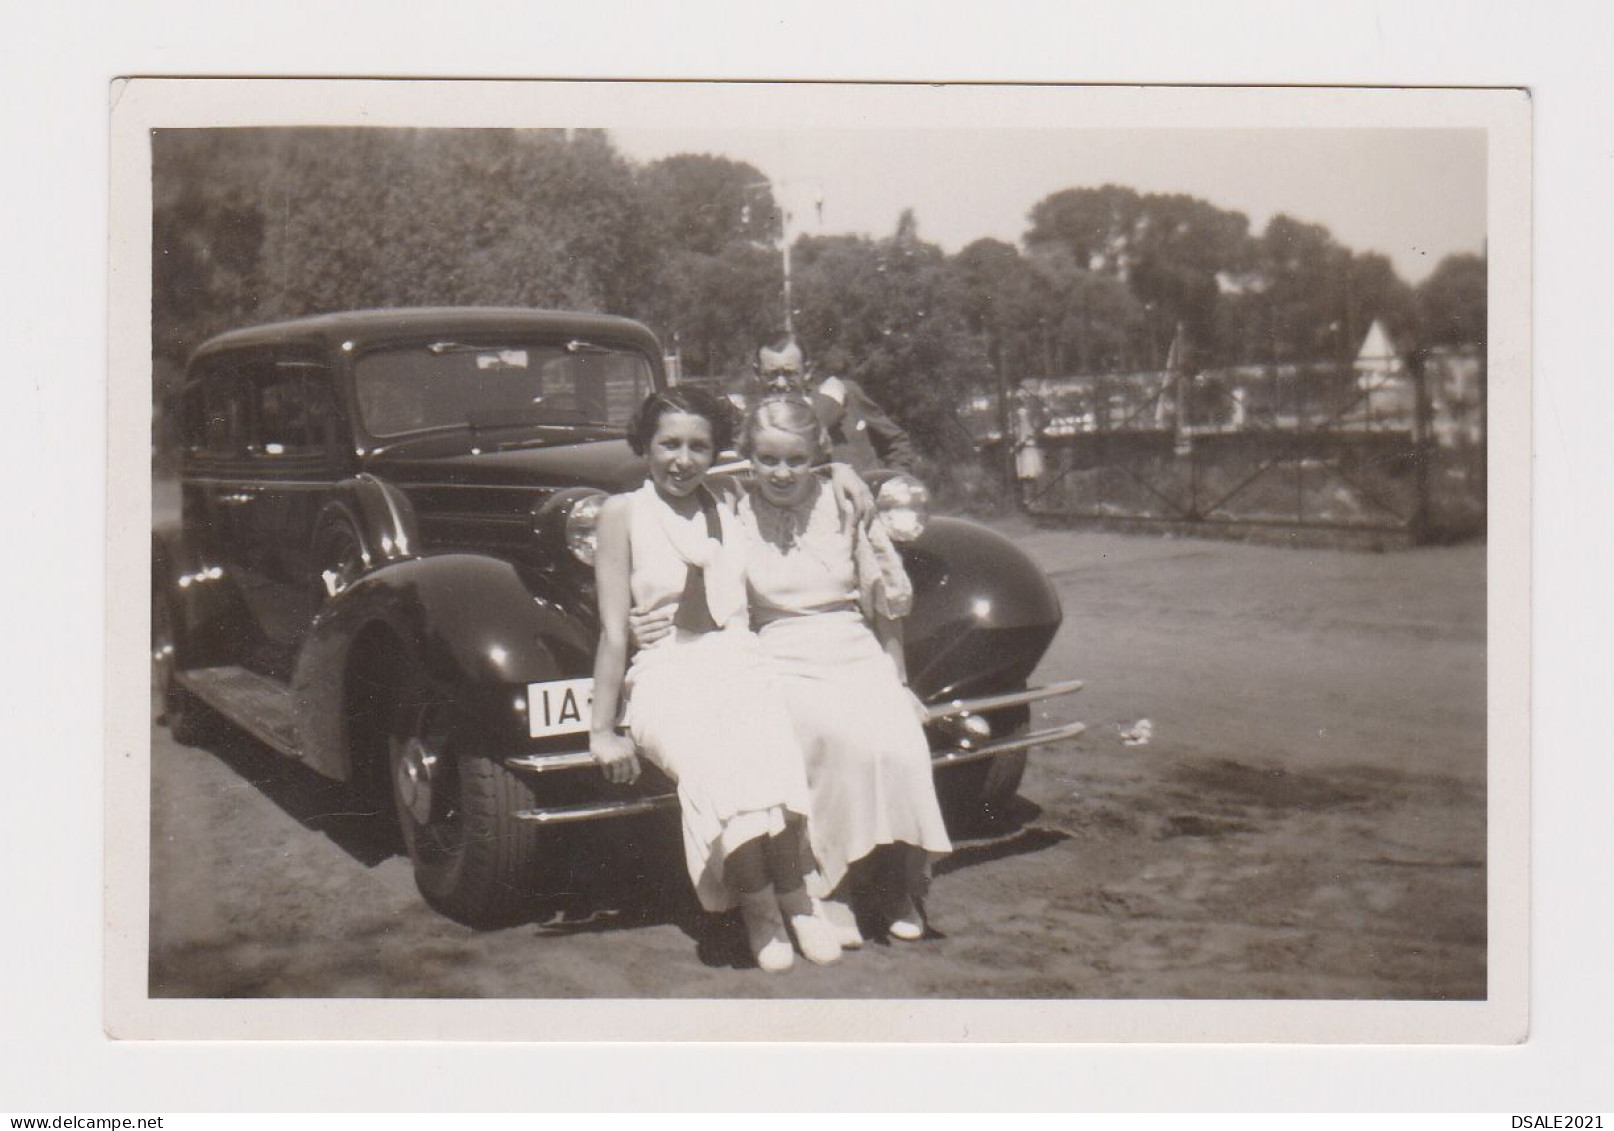 Two Pretty Young Women Sitting On Car Bumper, Classic Car, Scene, Vintage 1930s Orig Photo 9.1x6.1cm. (59093) - Cars